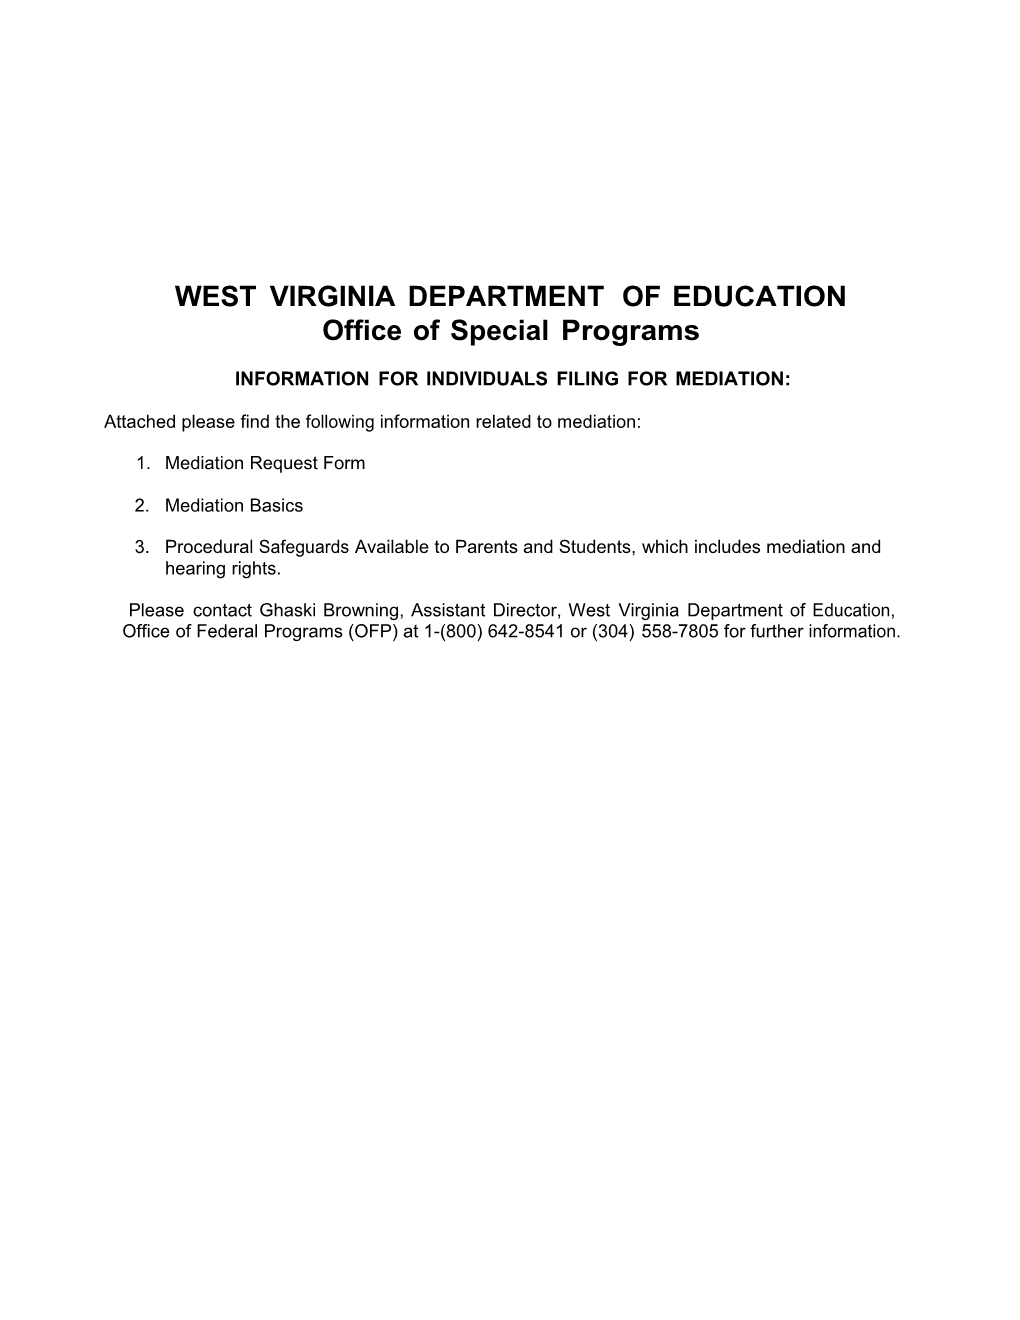 WEST VIRGINIA DEPARTMENT of EDUCATION Office of Special Programs